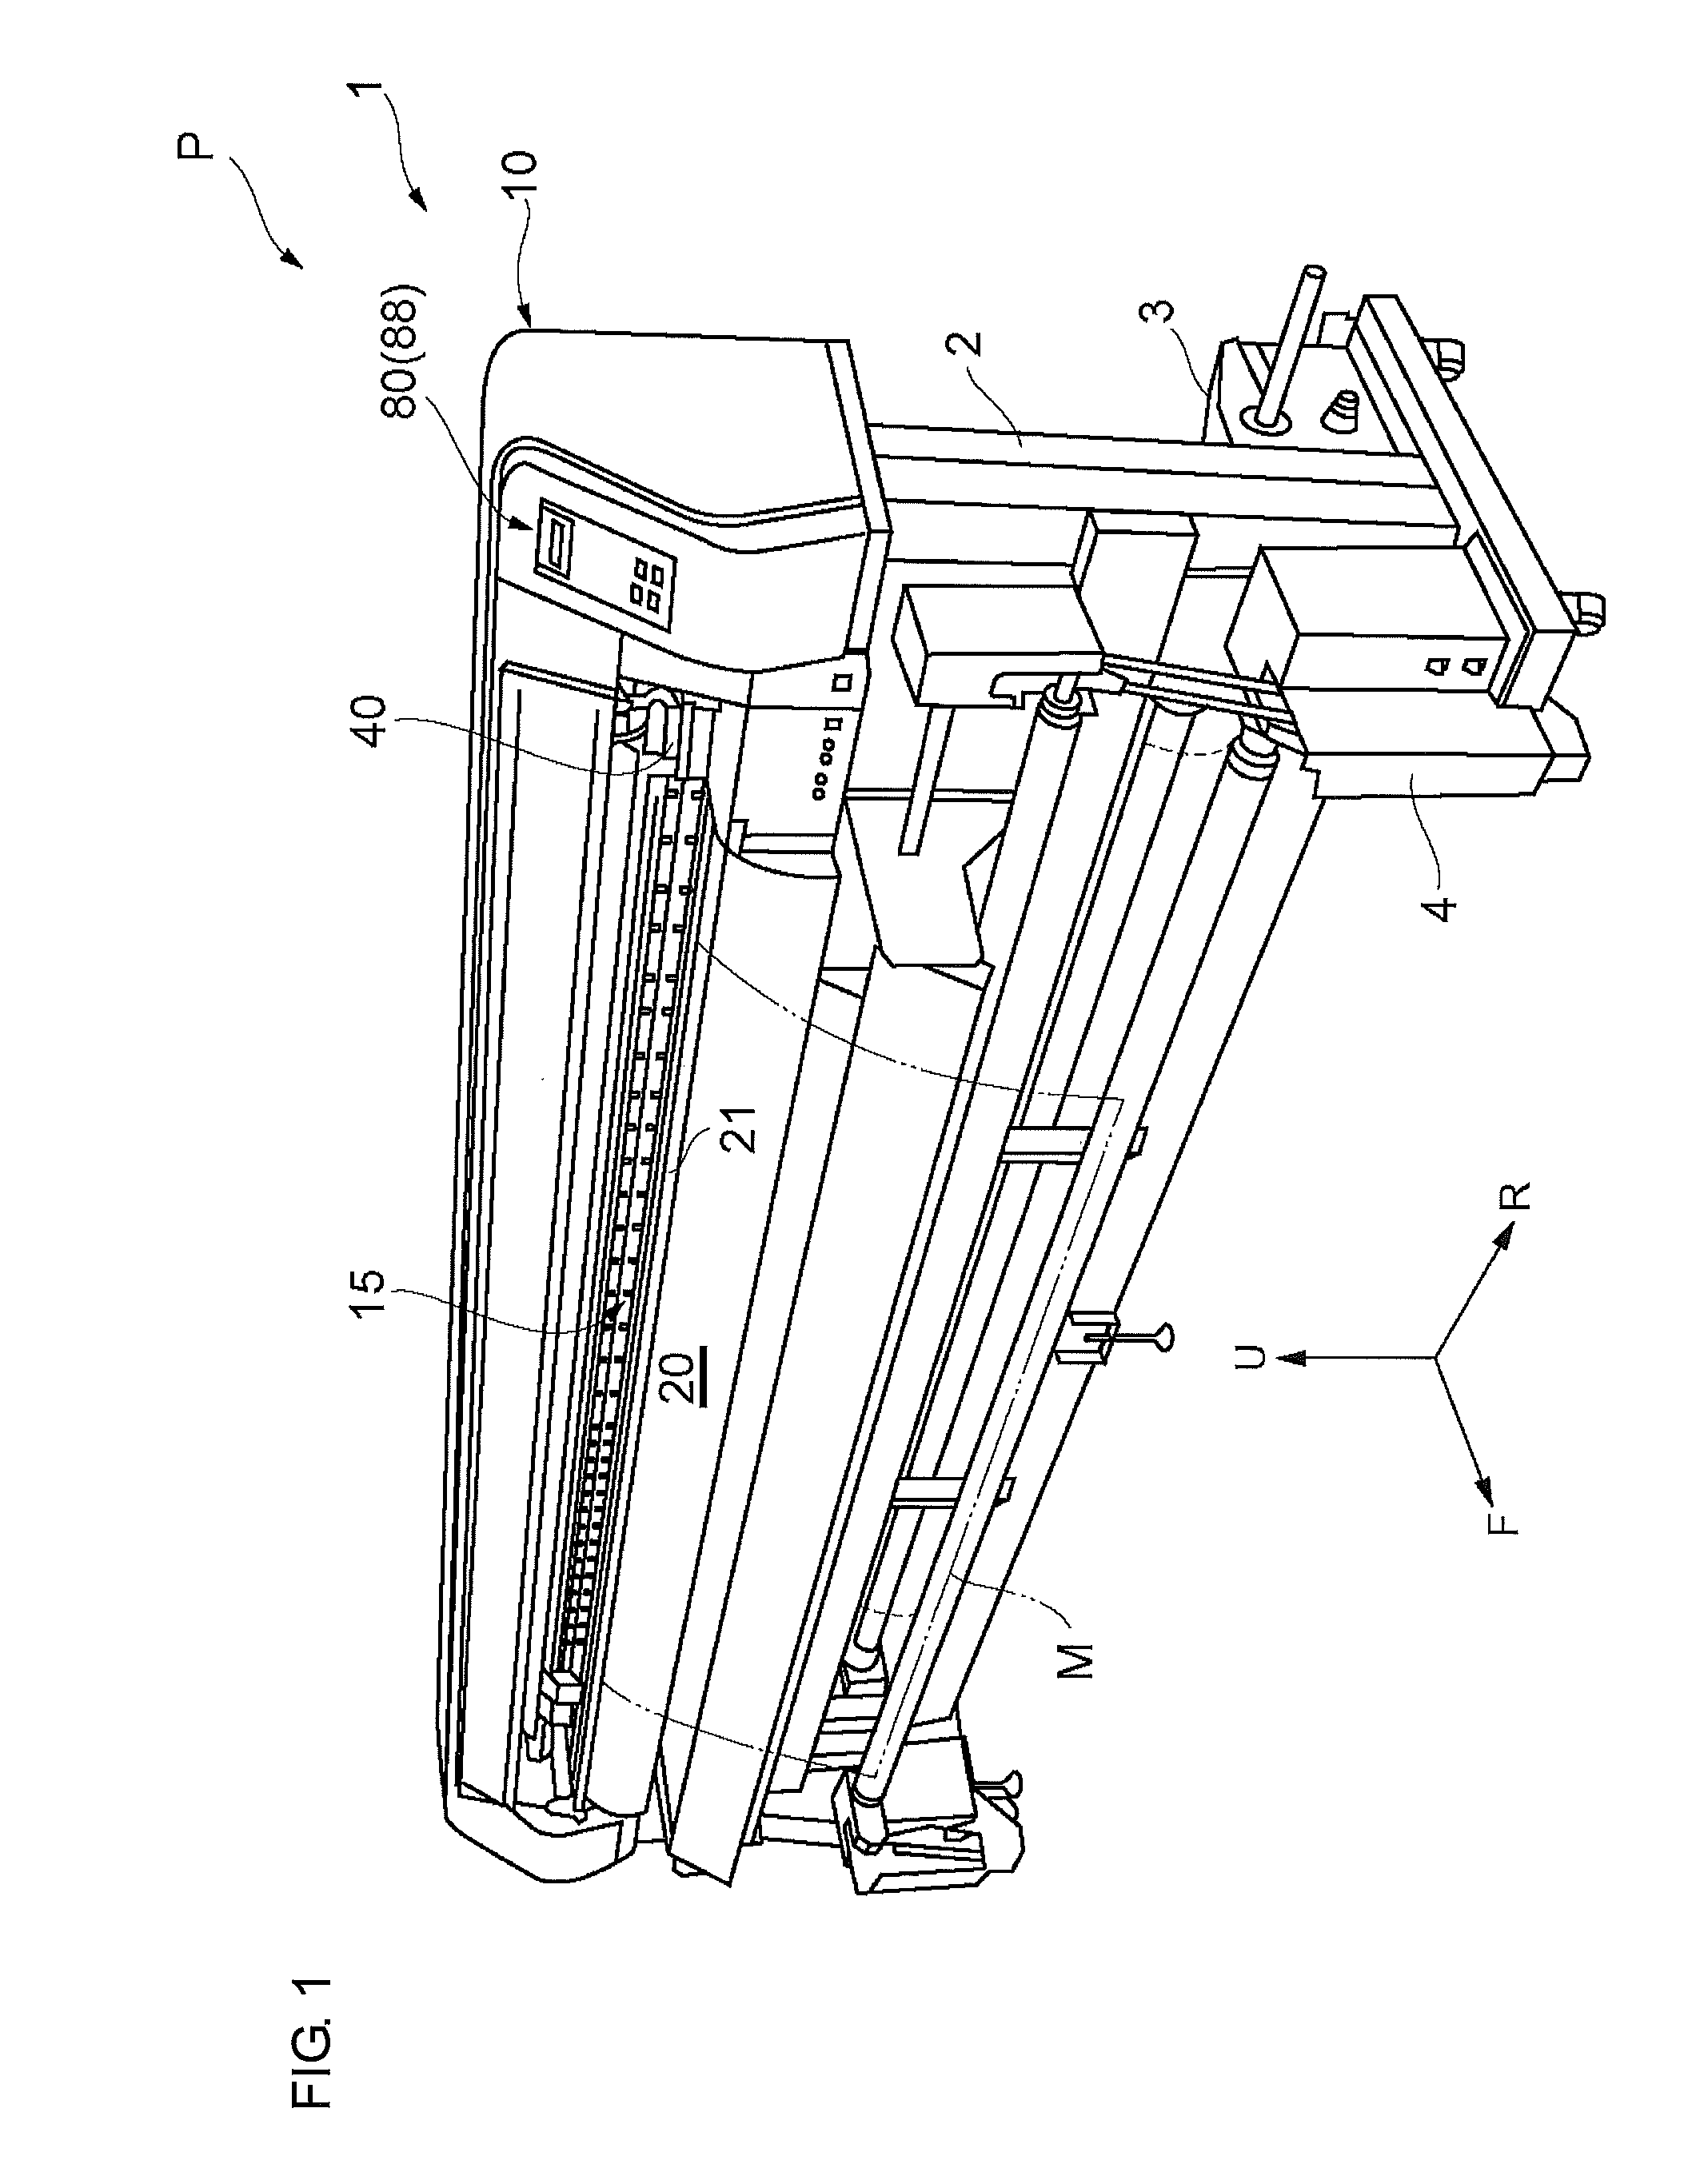 Inkjet printer system and ink supply apparatus